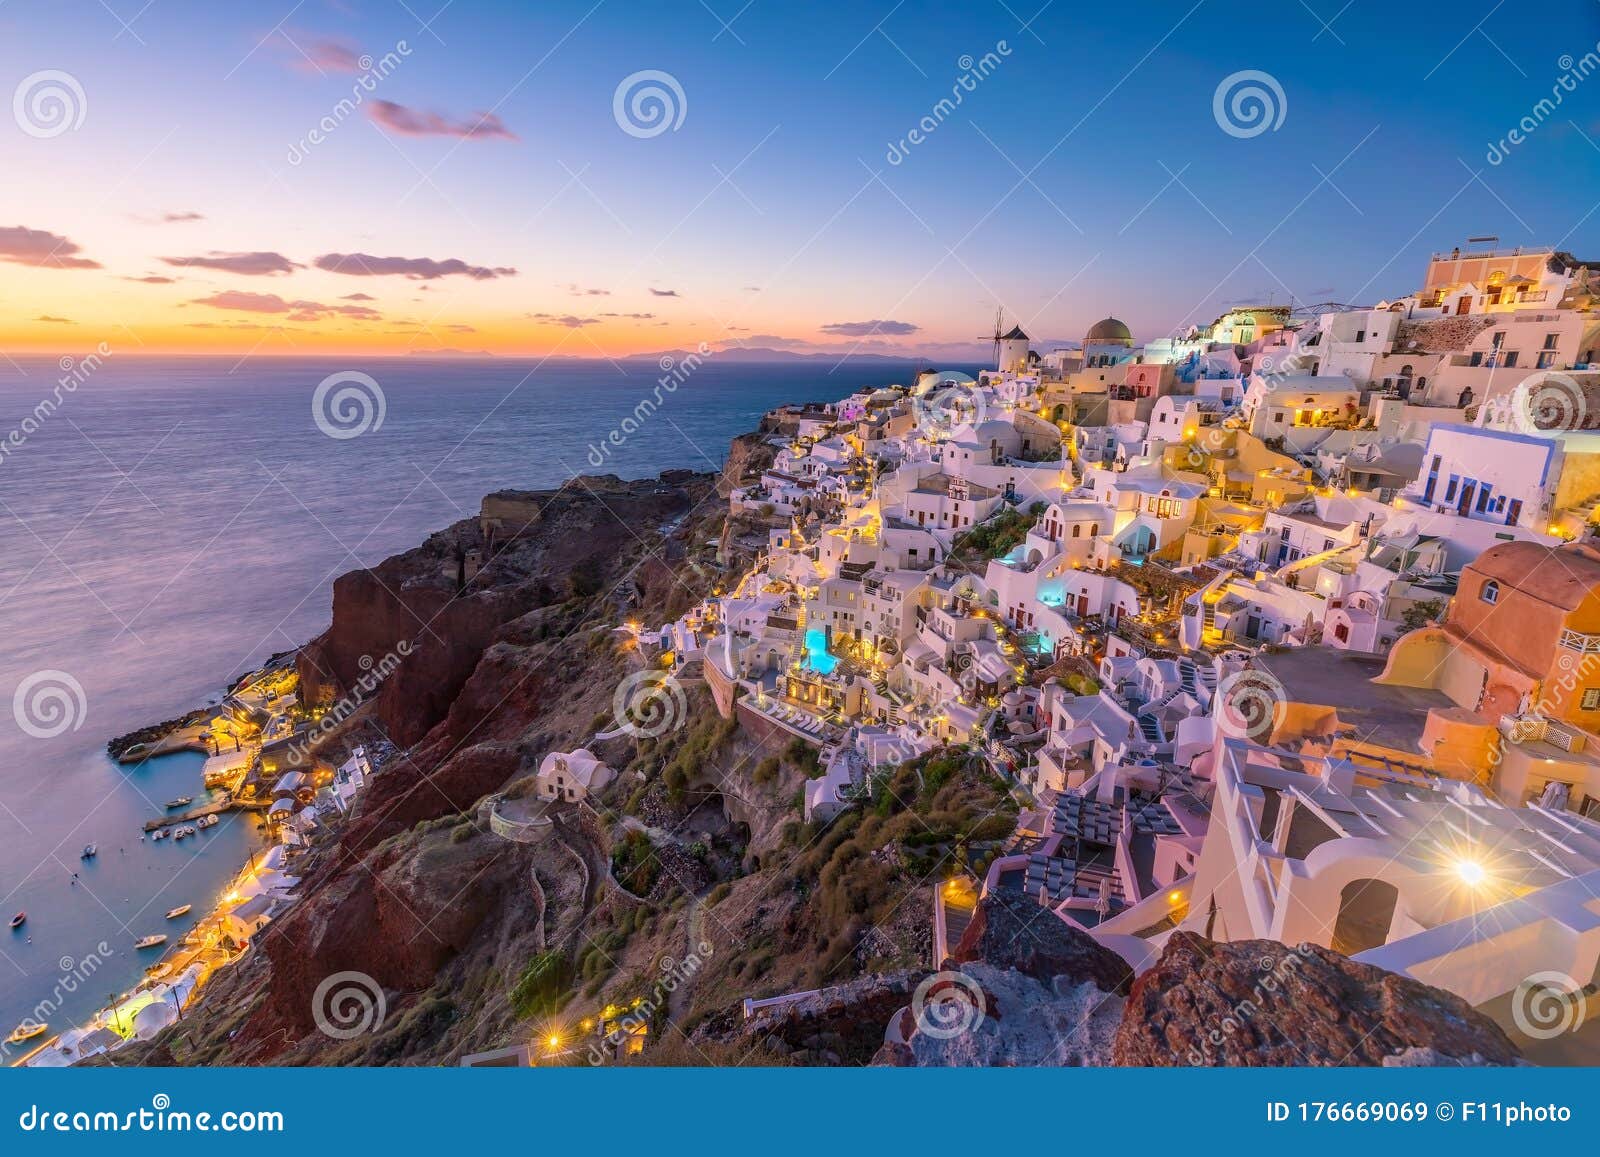 Oia Town Cityscape at Santorini Island in Greece Stock Image - Image of ...